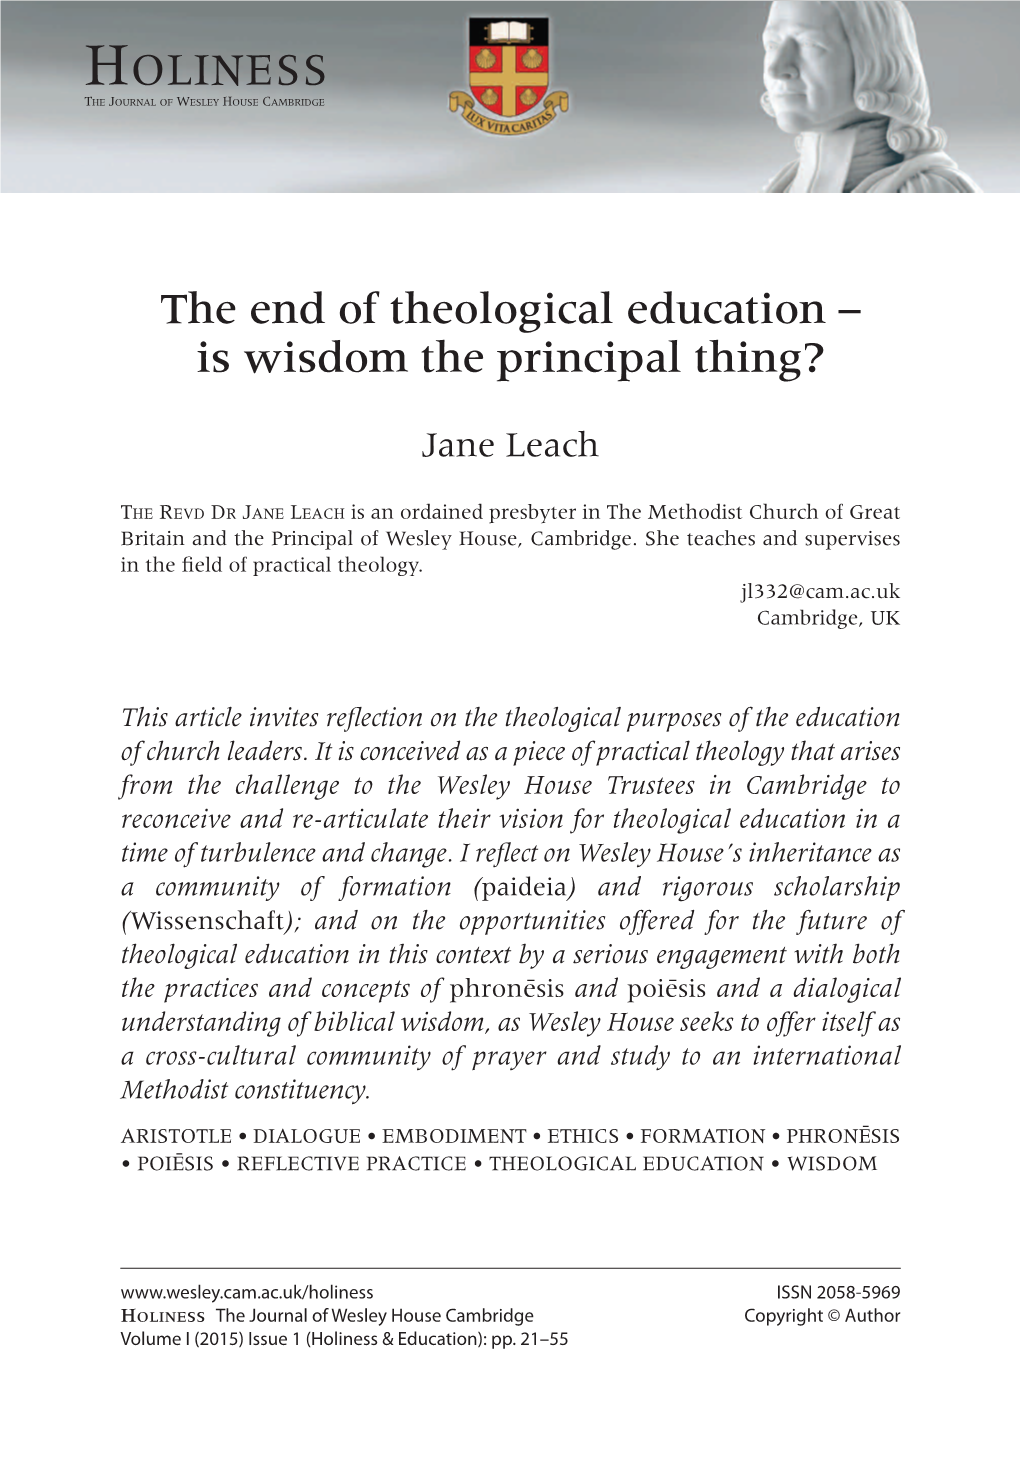 The End of Theological Education – Is Wisdom the Principal Thing?